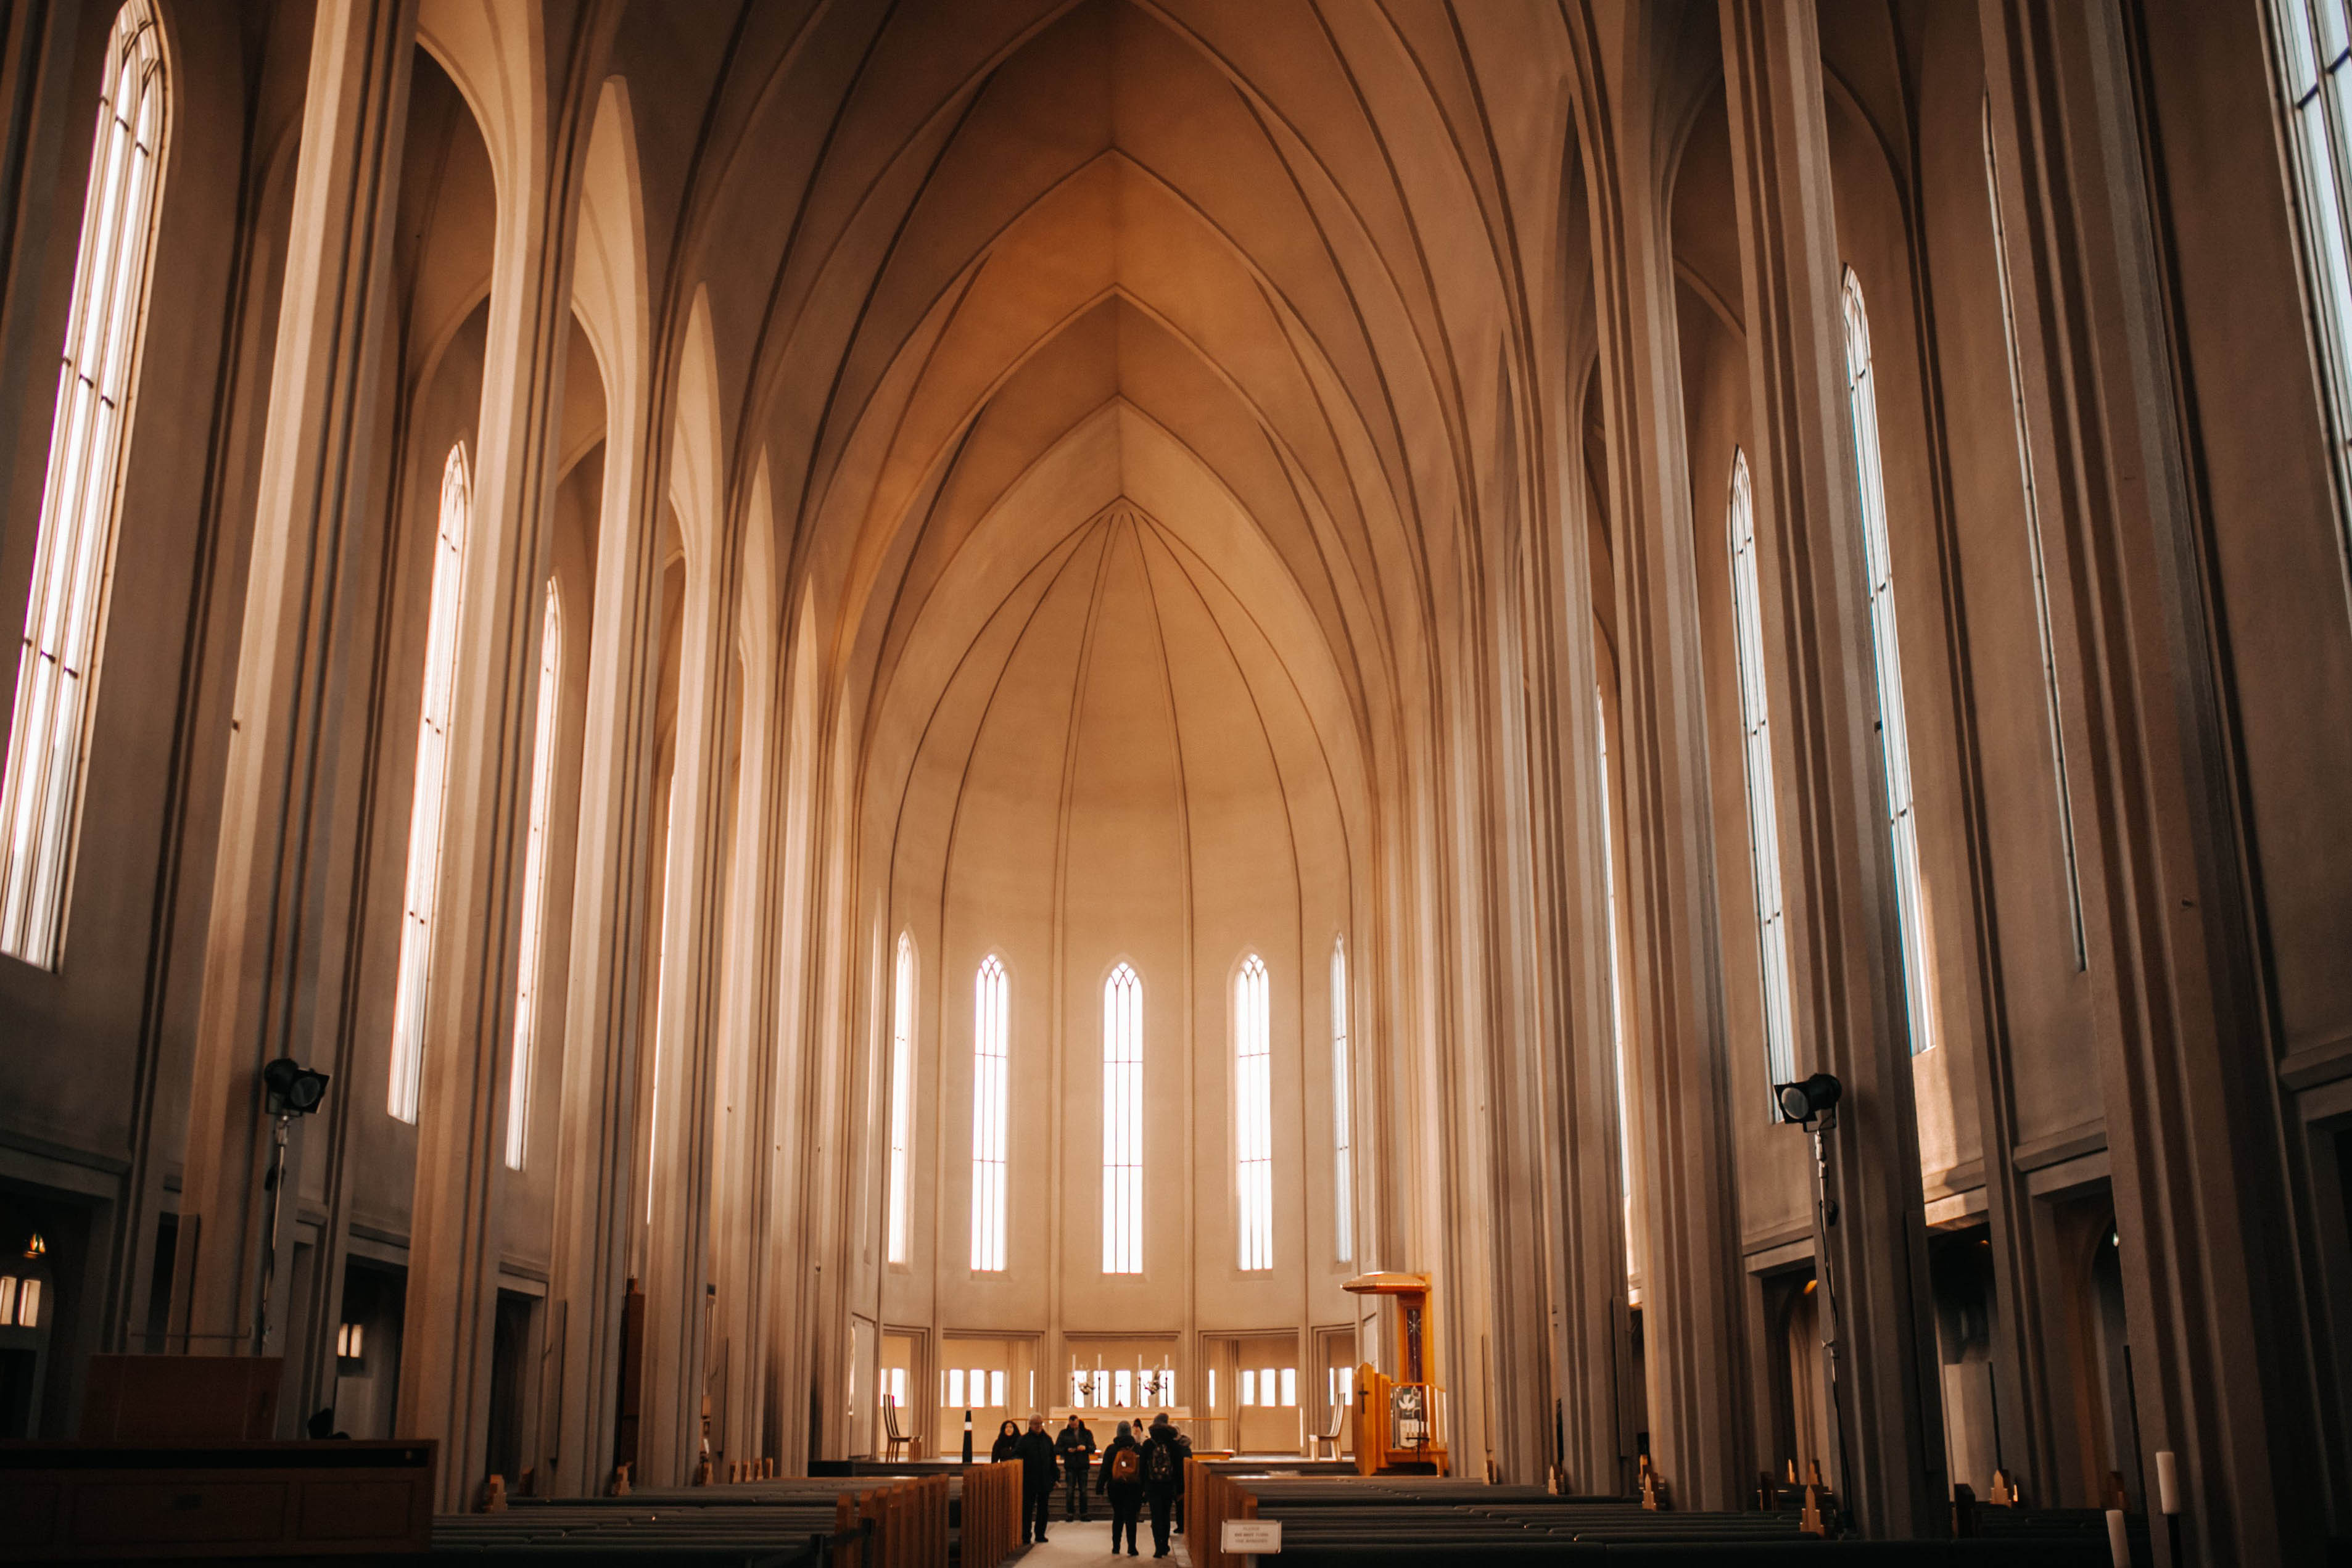 A large cathedral with large windows casting light. The ceiling is architected in such a way to support MHC's tagline of "Elevate your mission"